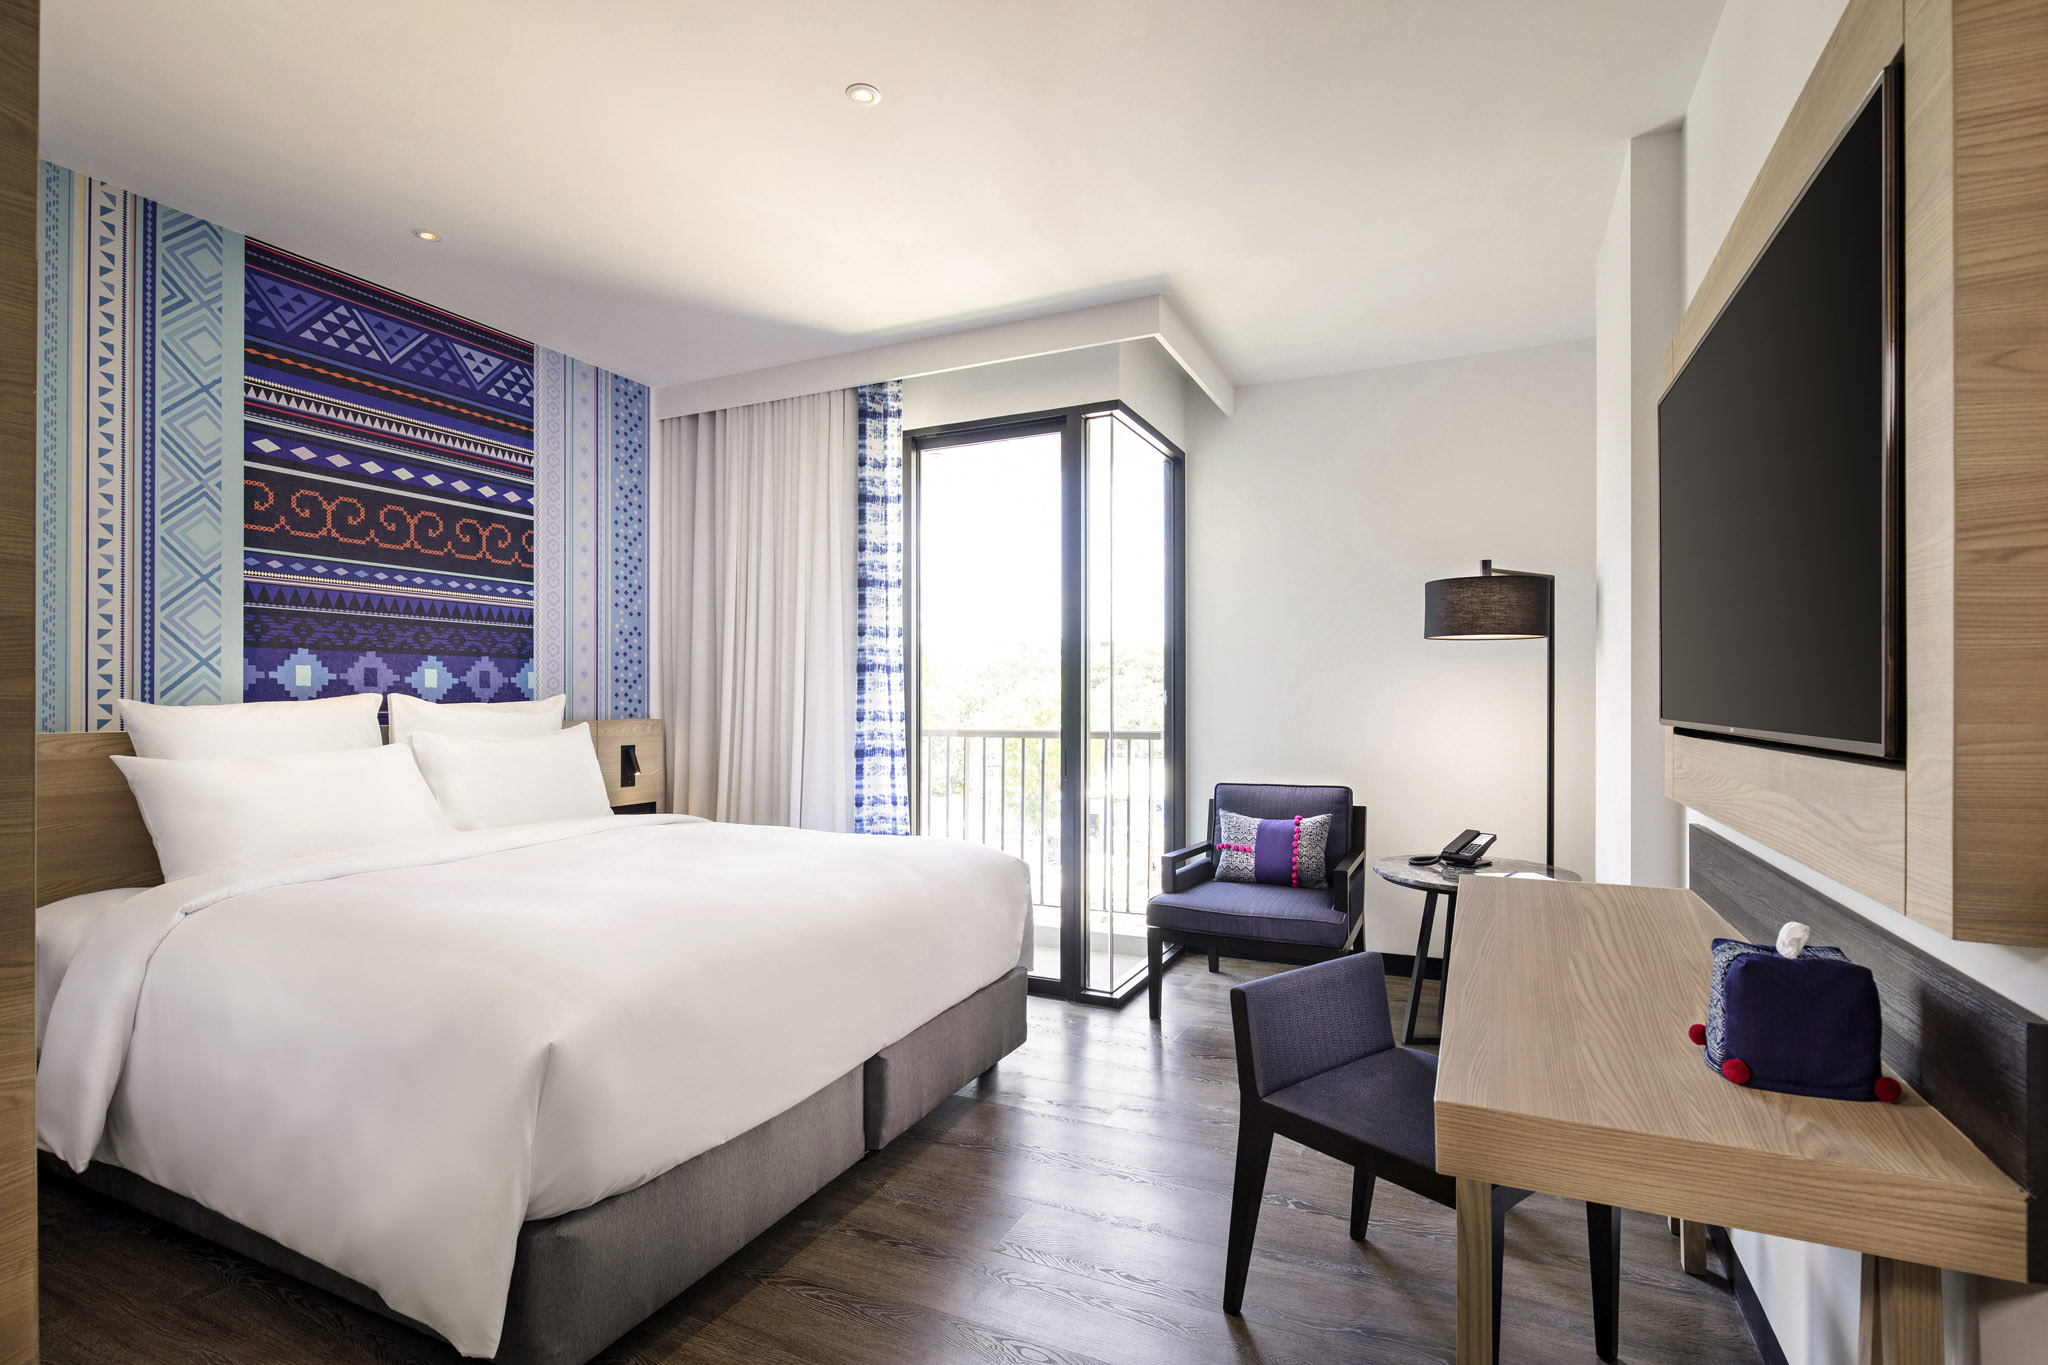 [Opening Promo Inside] The comforting and energizing hospitality of Novotel debuts in Chiang Mai with Chiang Mai Nimman Jouryneyhub - Alvinology